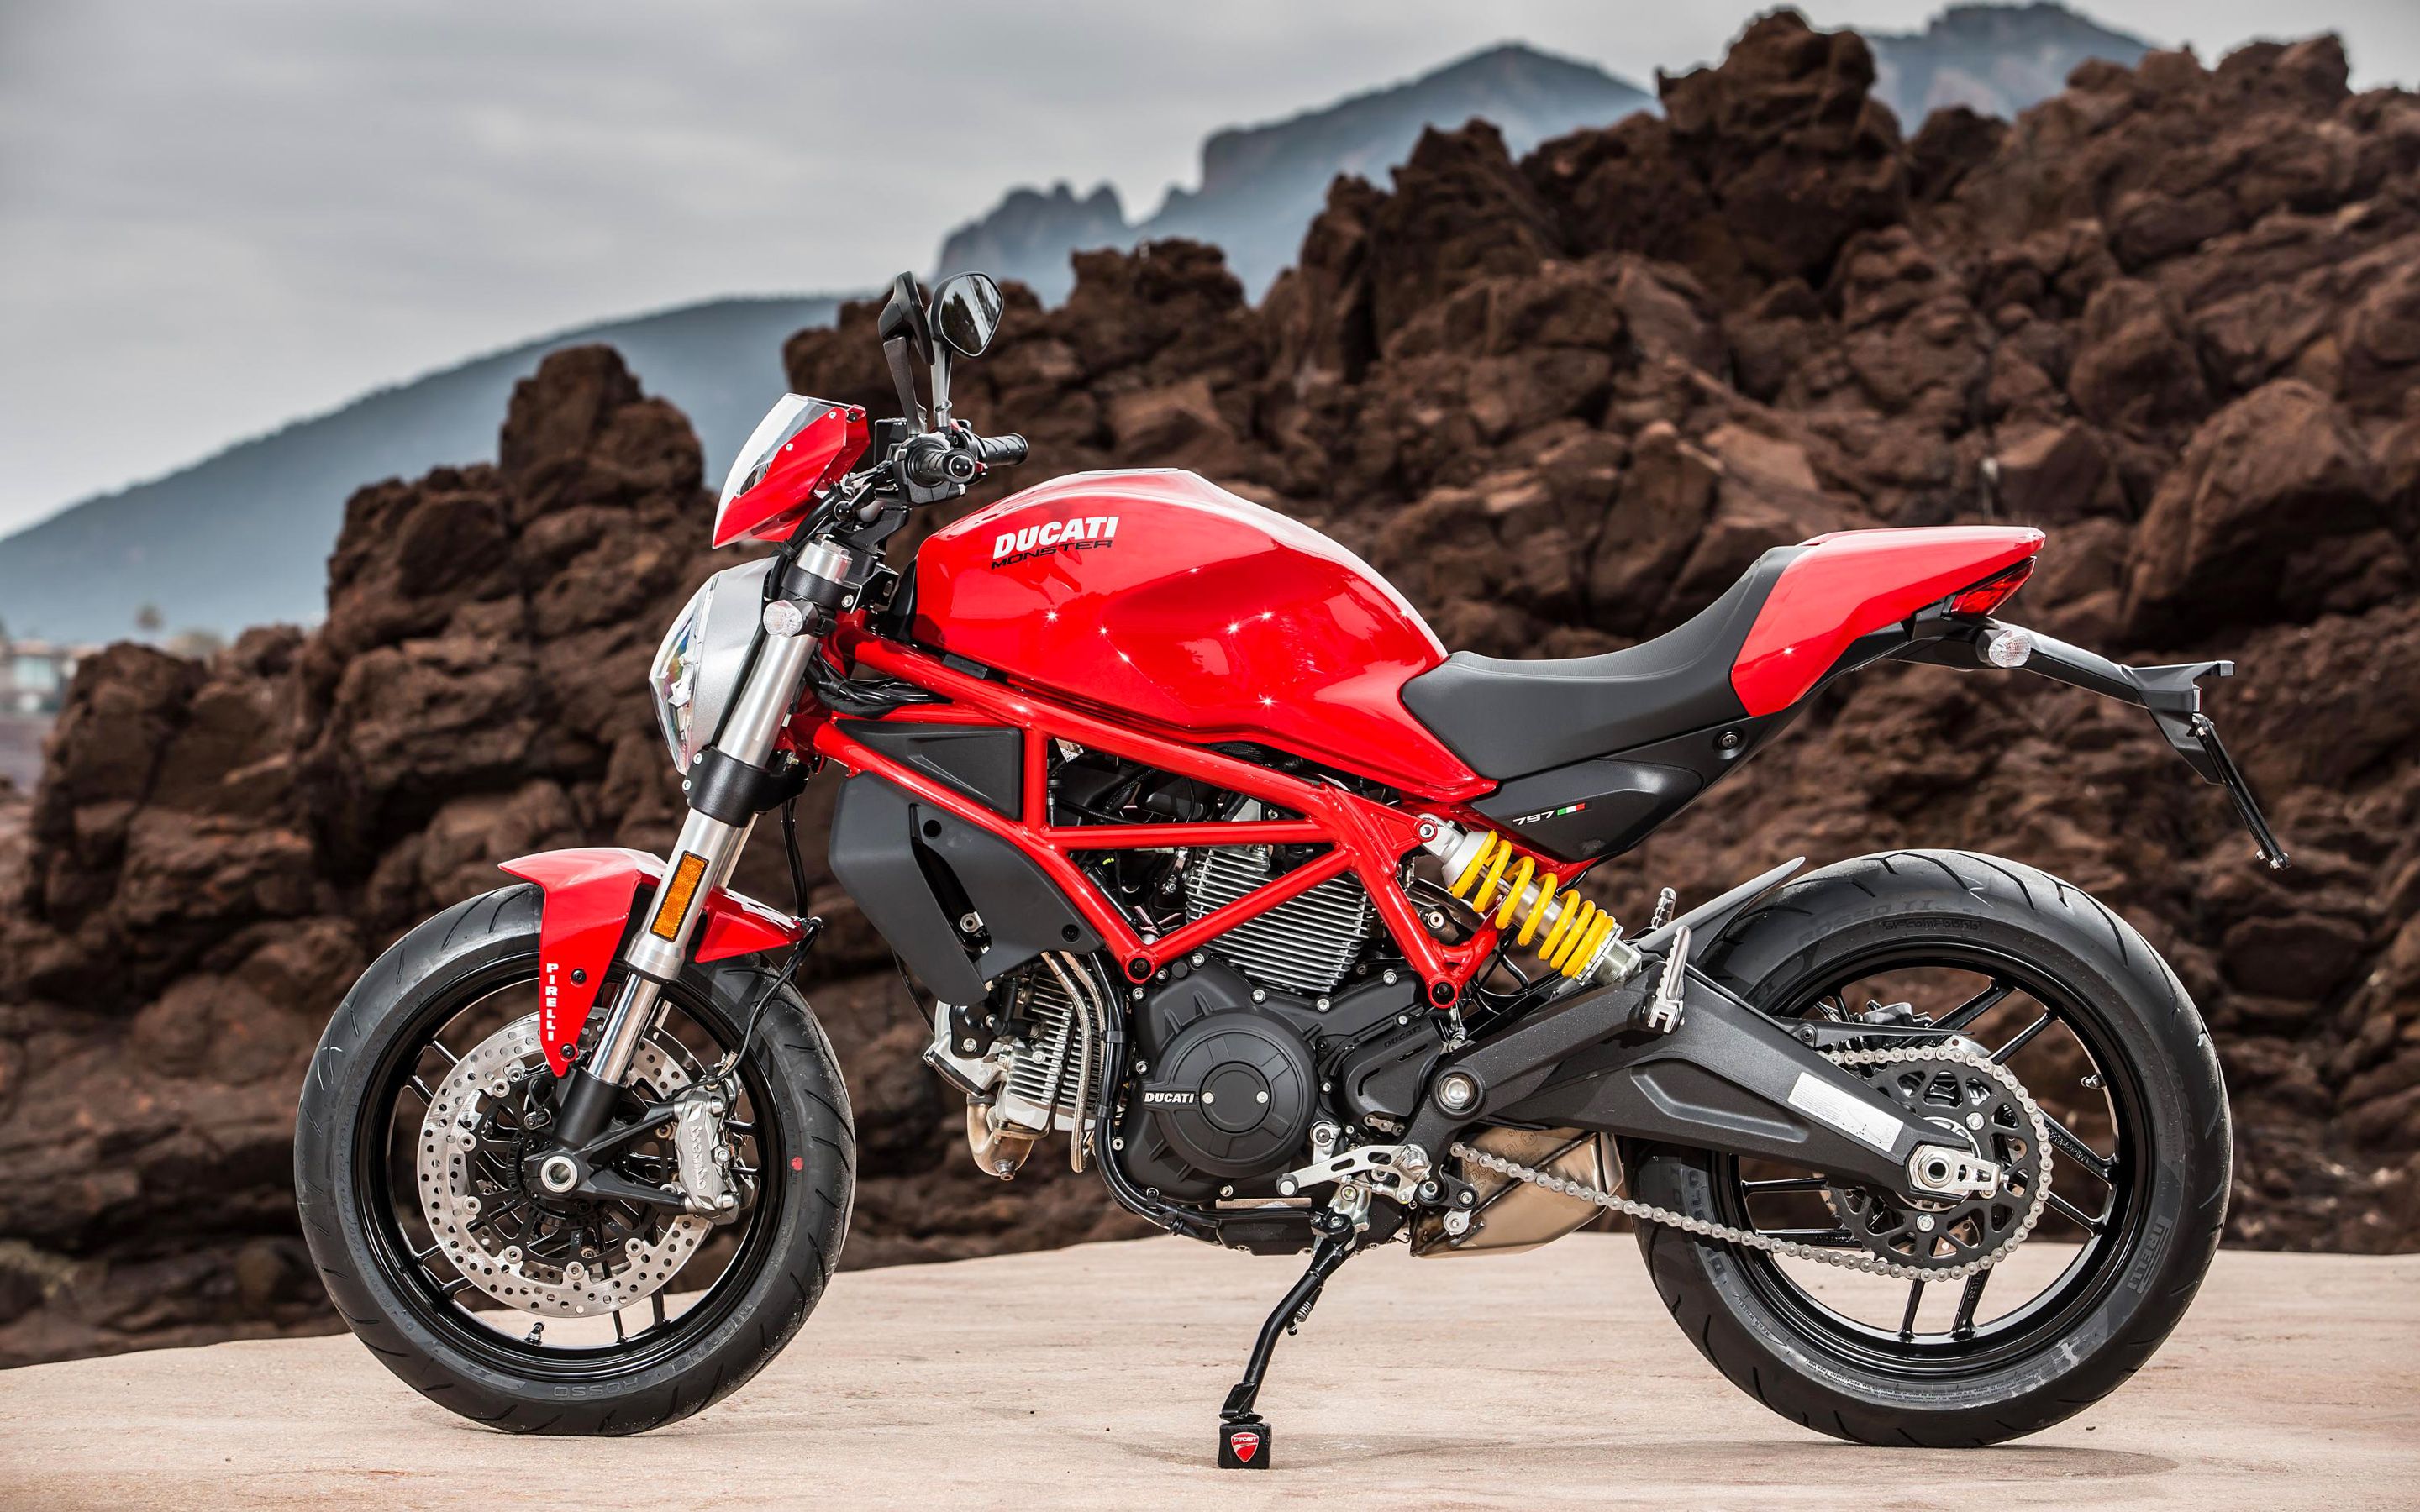 Download wallpaper Ducati Monster sportbikes, 2017 bikes, new Monster italian motorcycles, Ducati for desktop with resolution 2880x1800. High Quality HD picture wallpaper